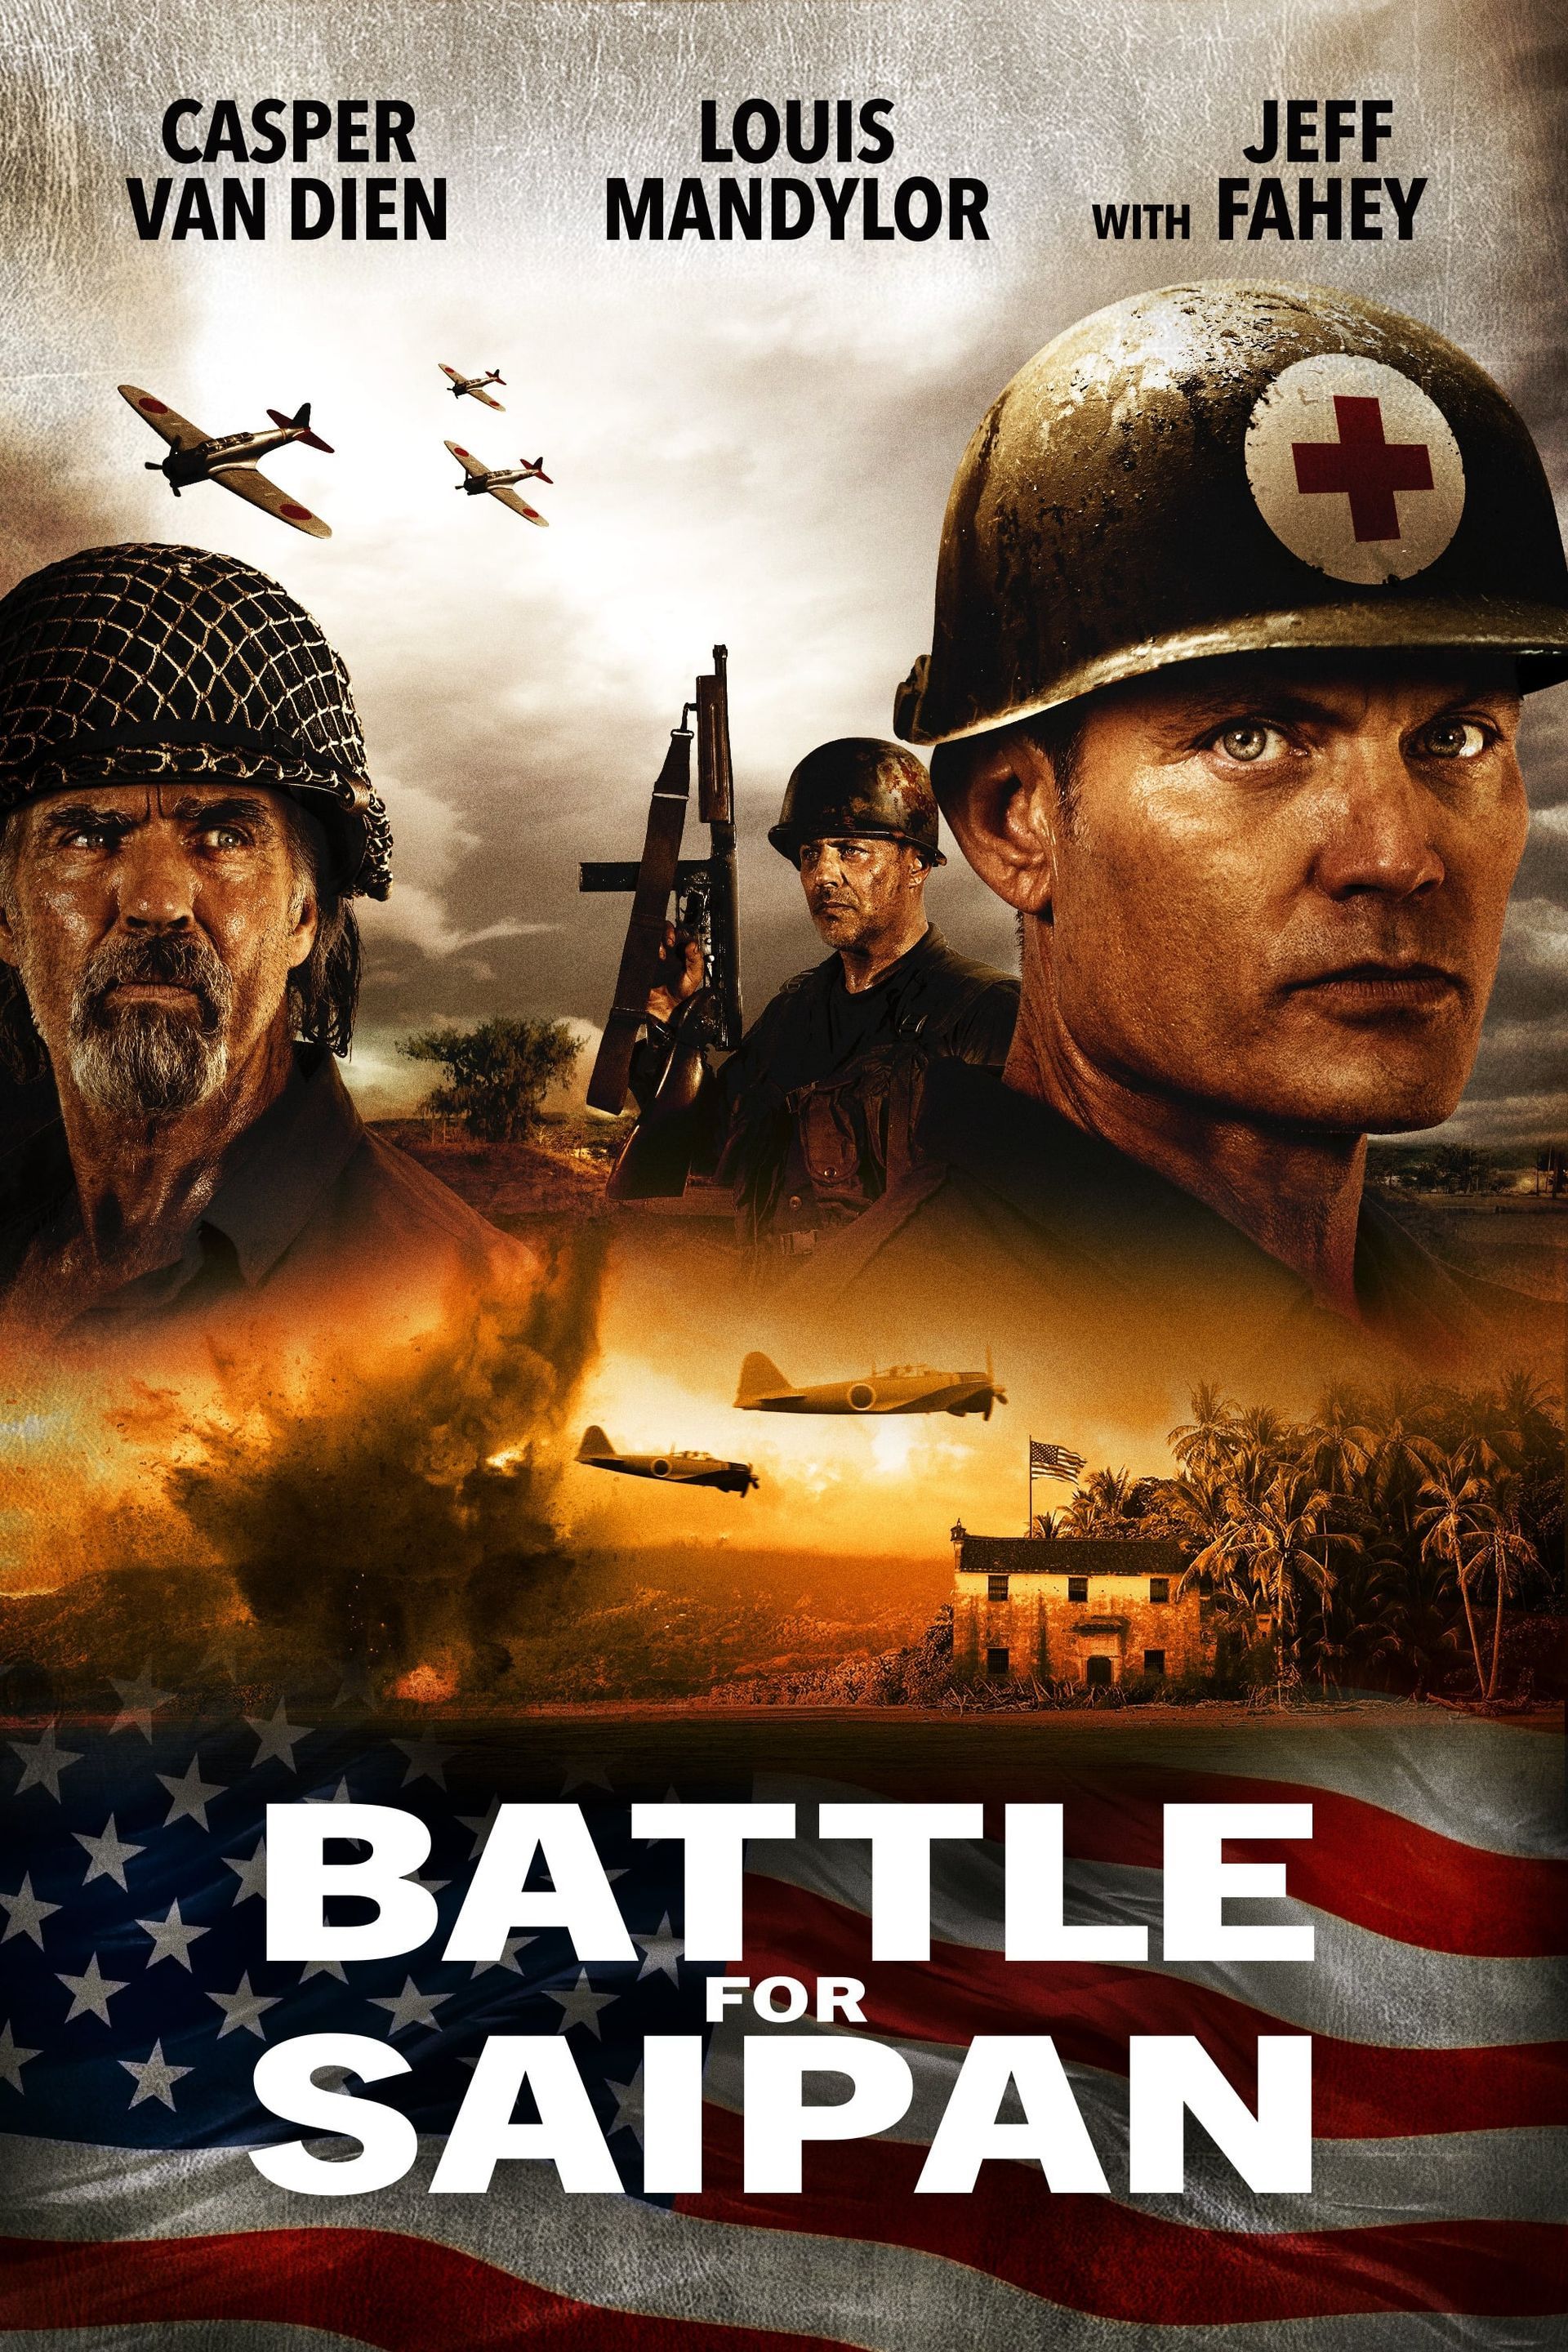 Title; Battlebox (2023) Genre; Action, Dram, History War Rate; 7.9  Storyline With a sudden attack by the Japanese, British…